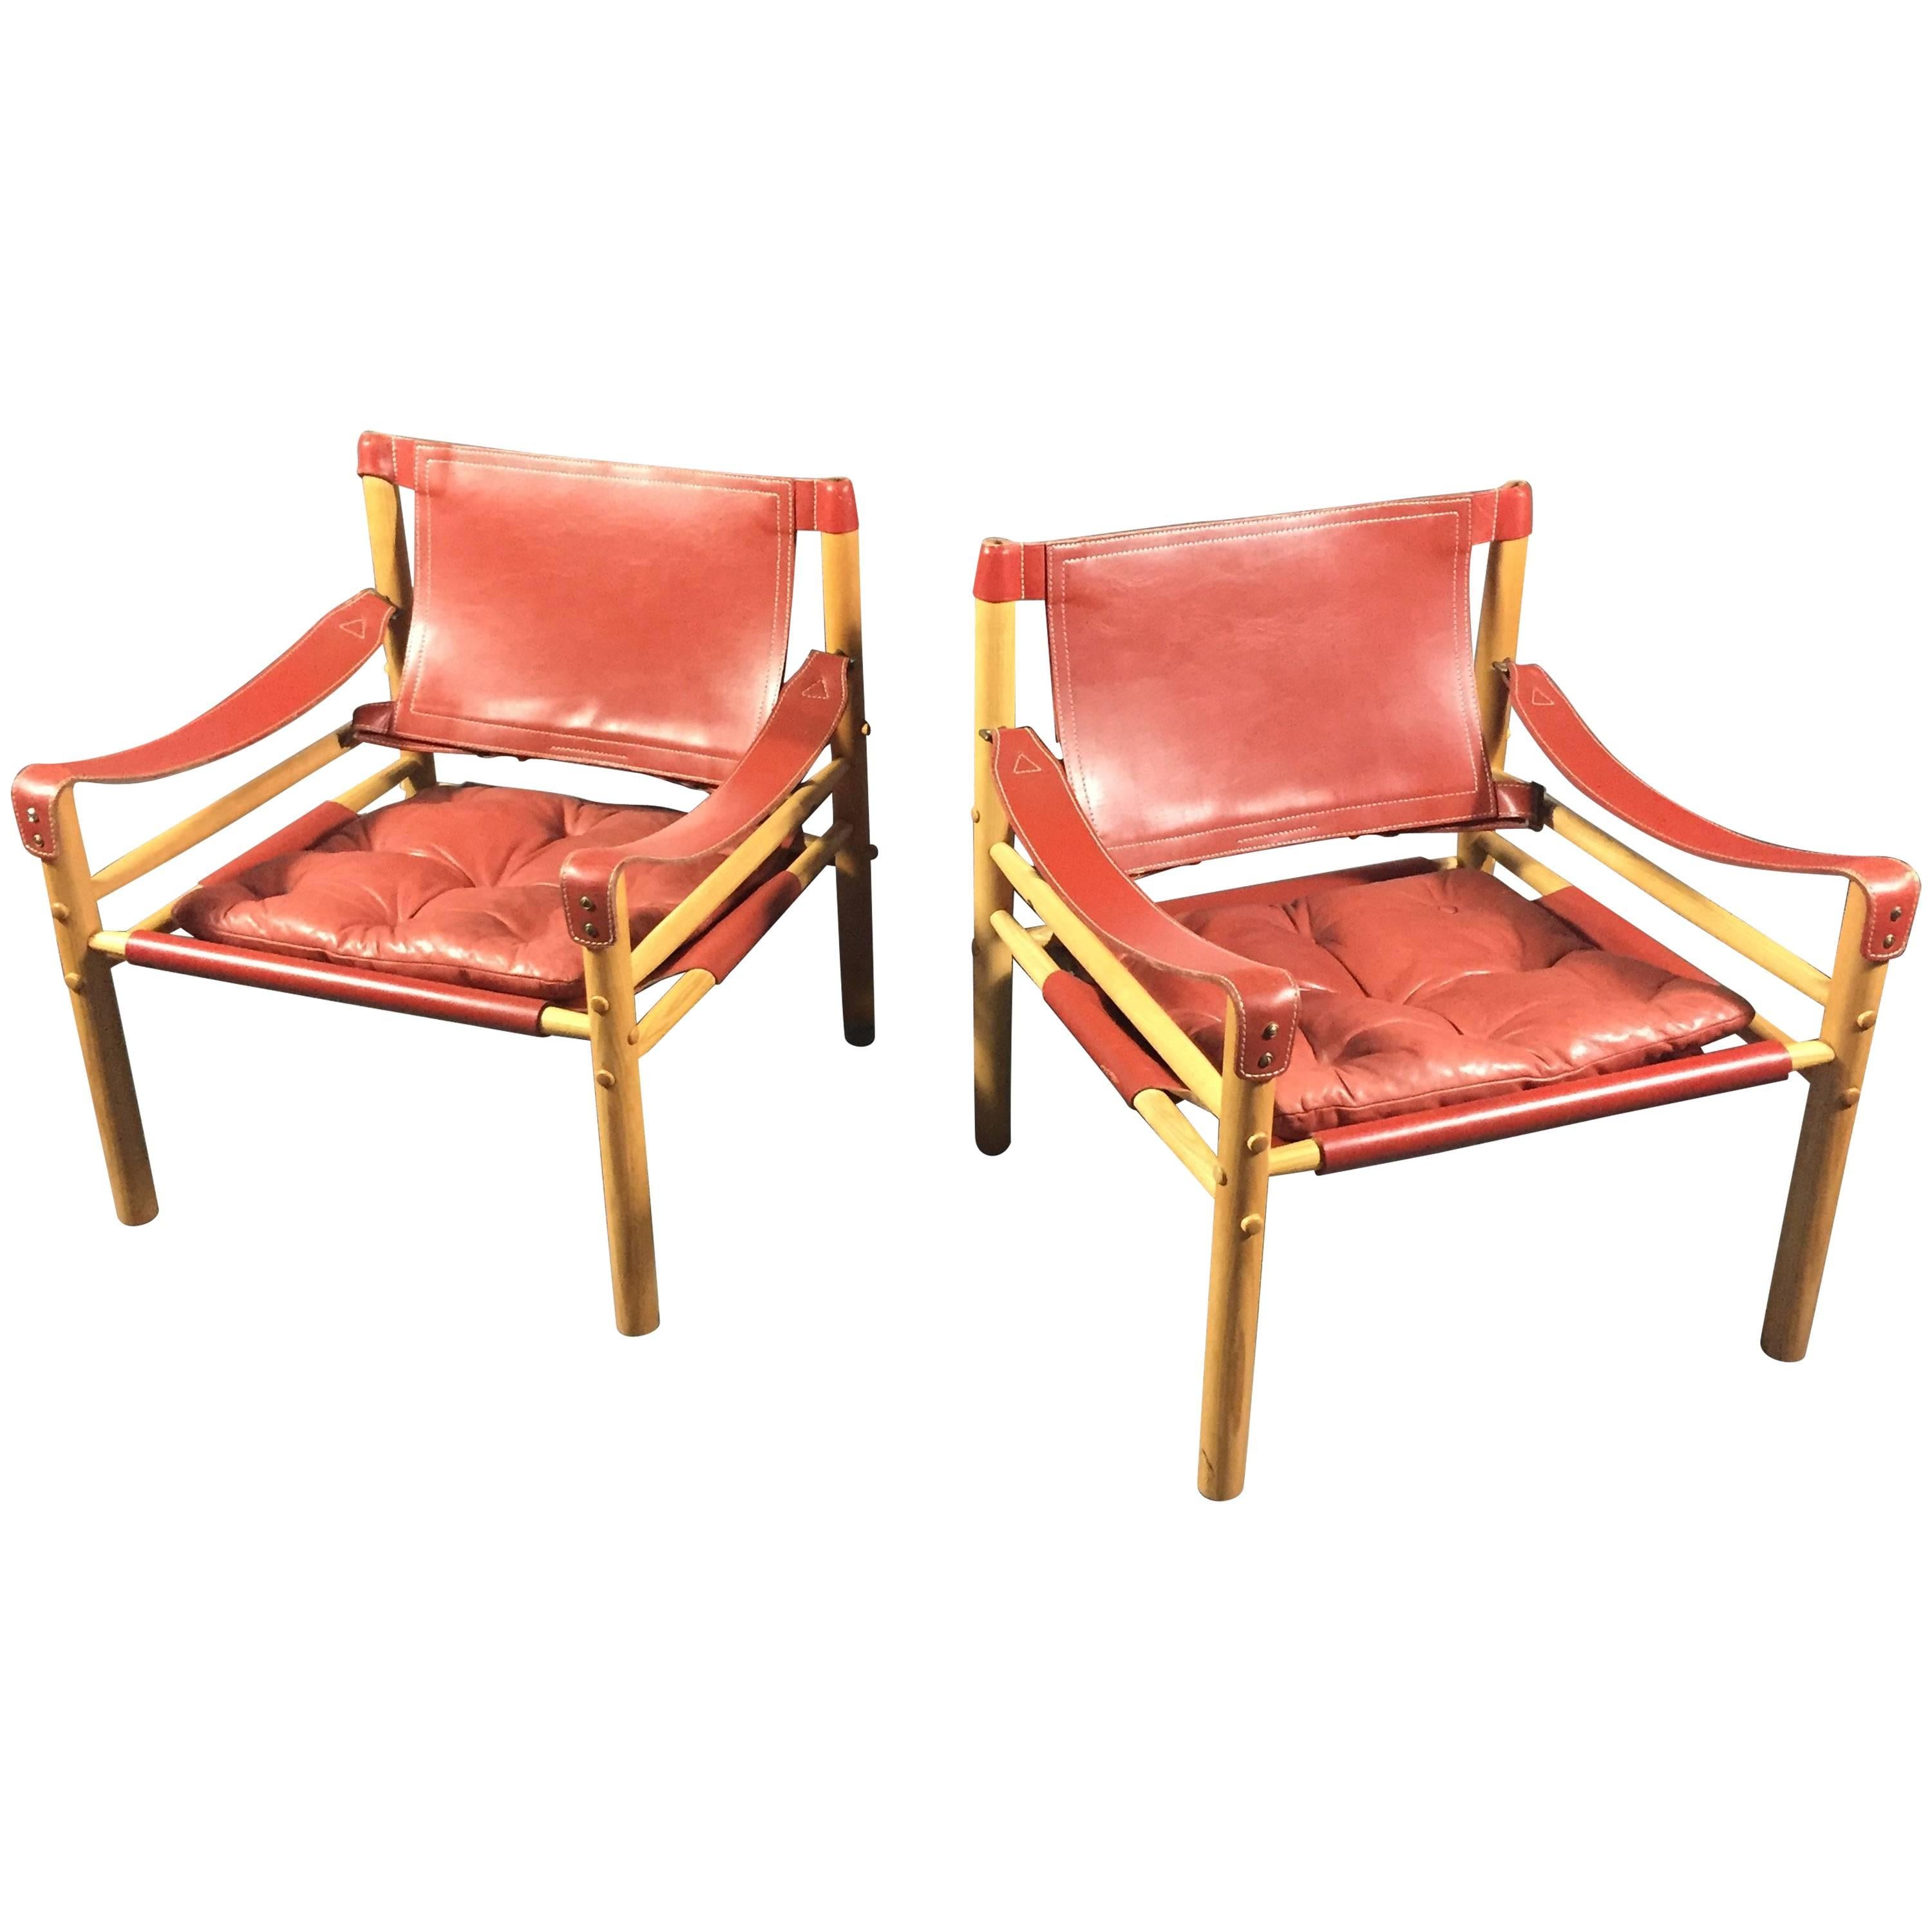 Pair of Arne Norell Red or Orange Leather Sirocco Chairs, Sweden For Sale